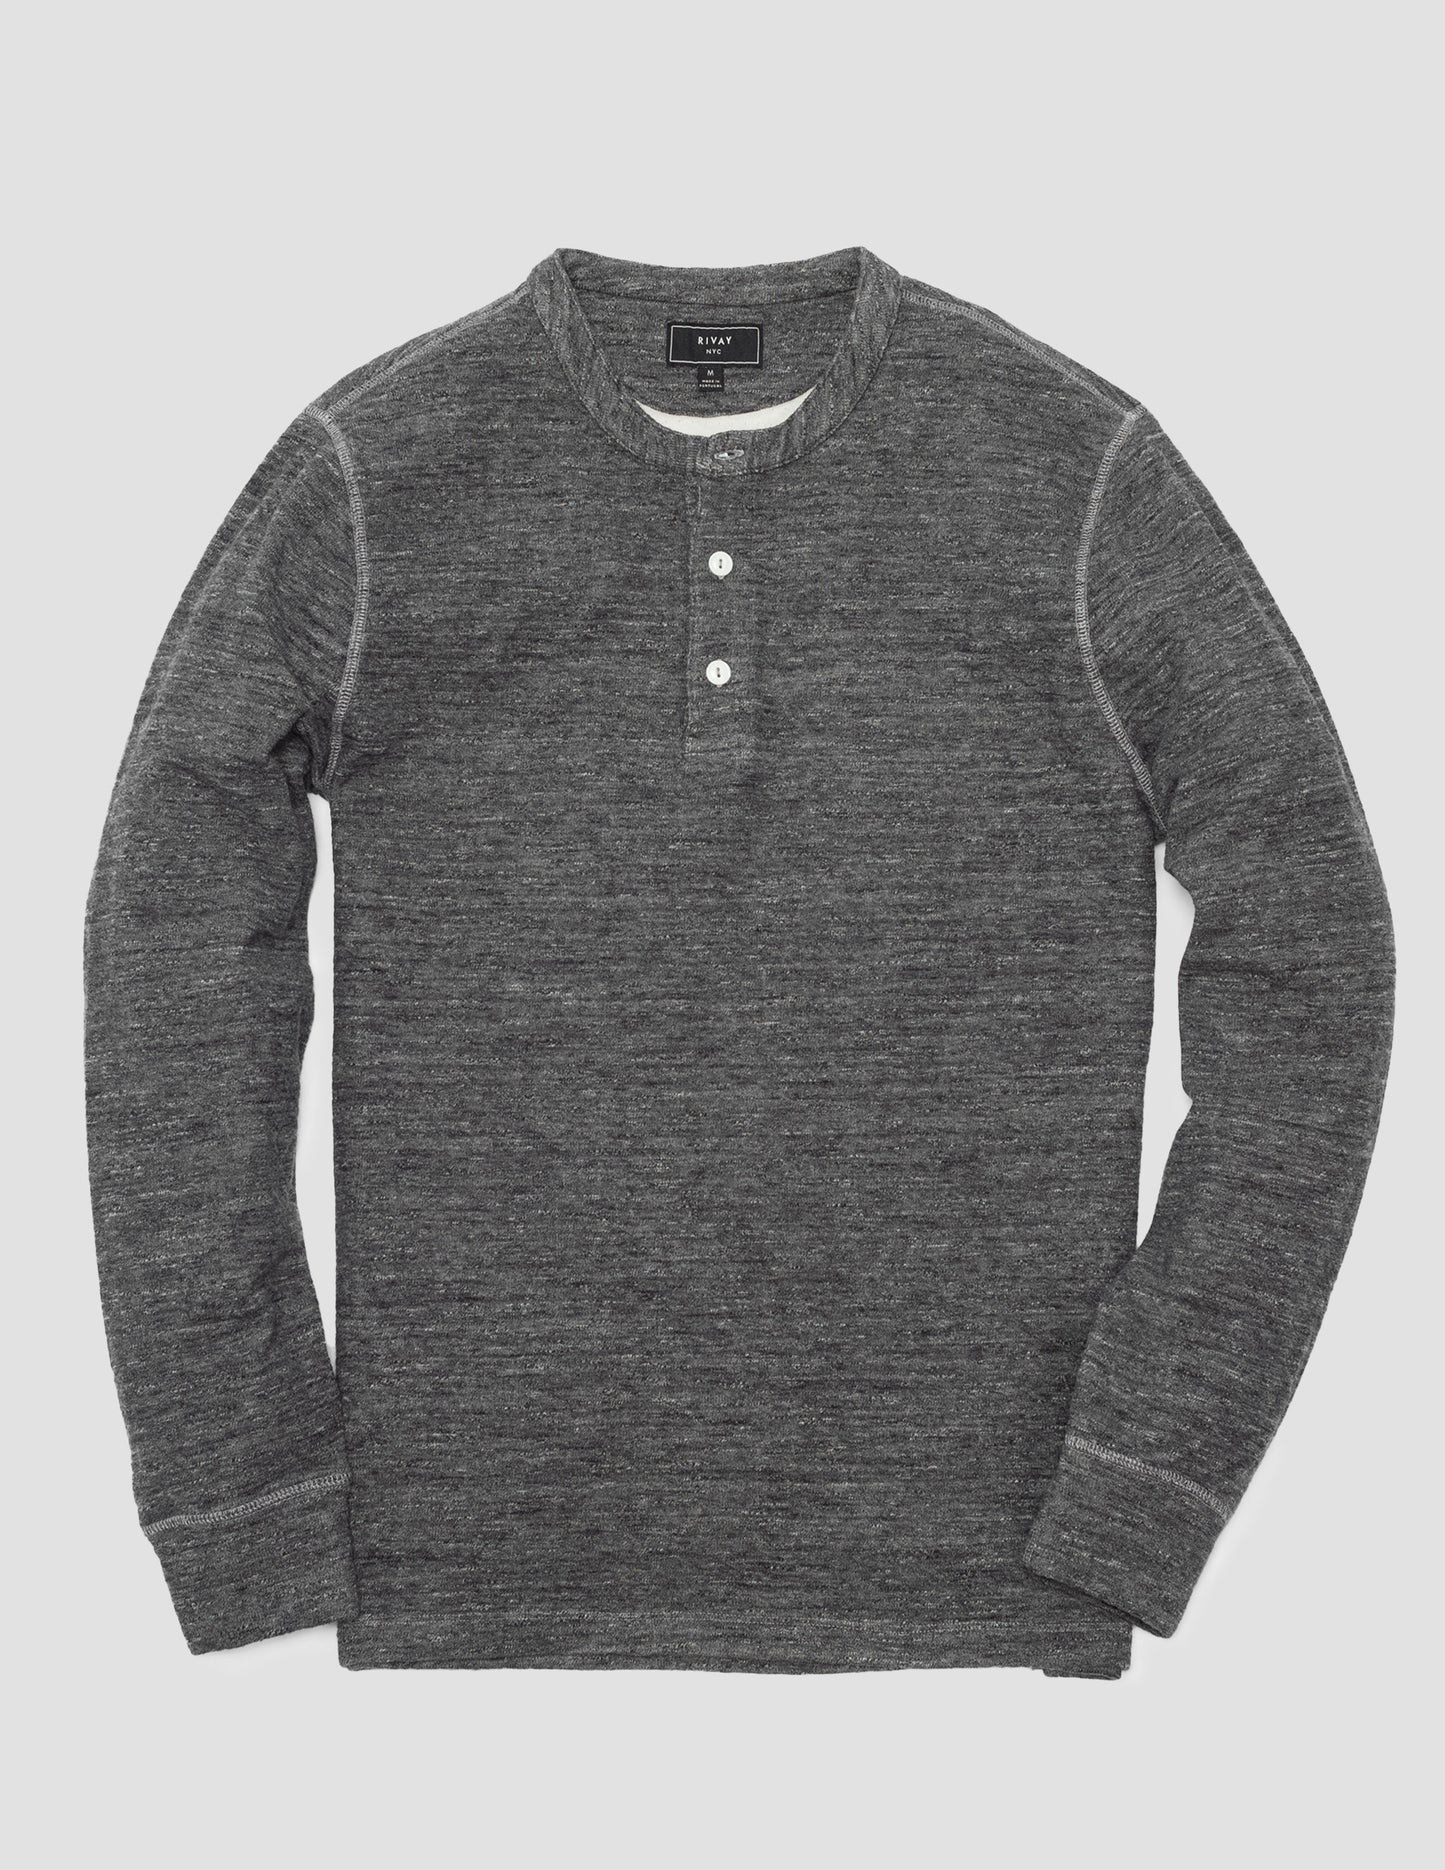 Ford Double Knit Henley in Charcoal – RIVAY